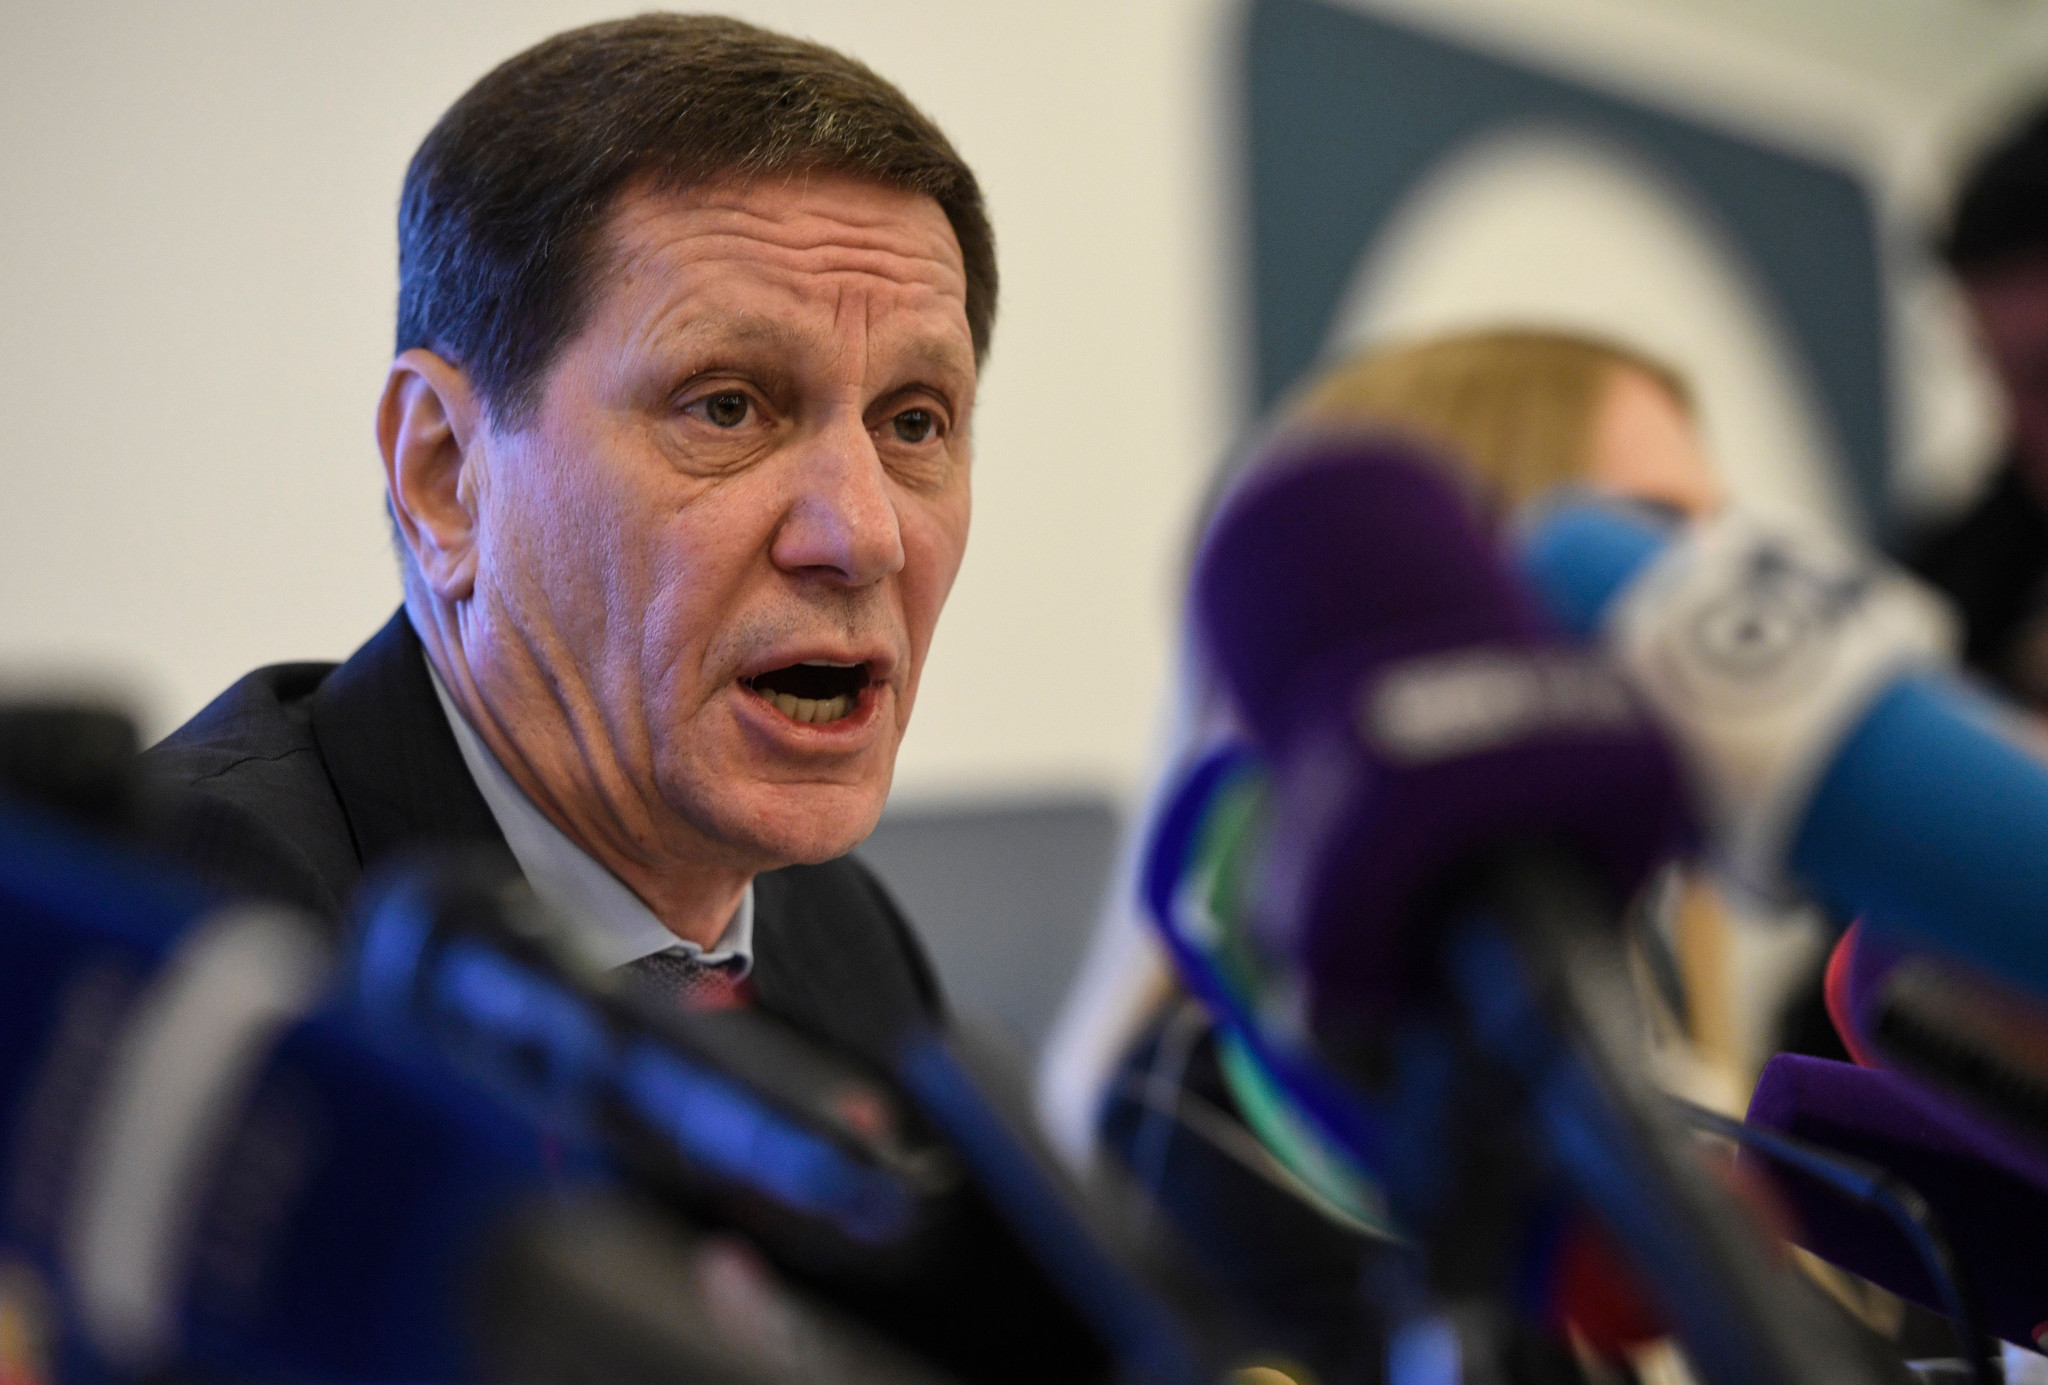 Alexander Zhukov has not yet confirmed if he will stand again ©Getty Images